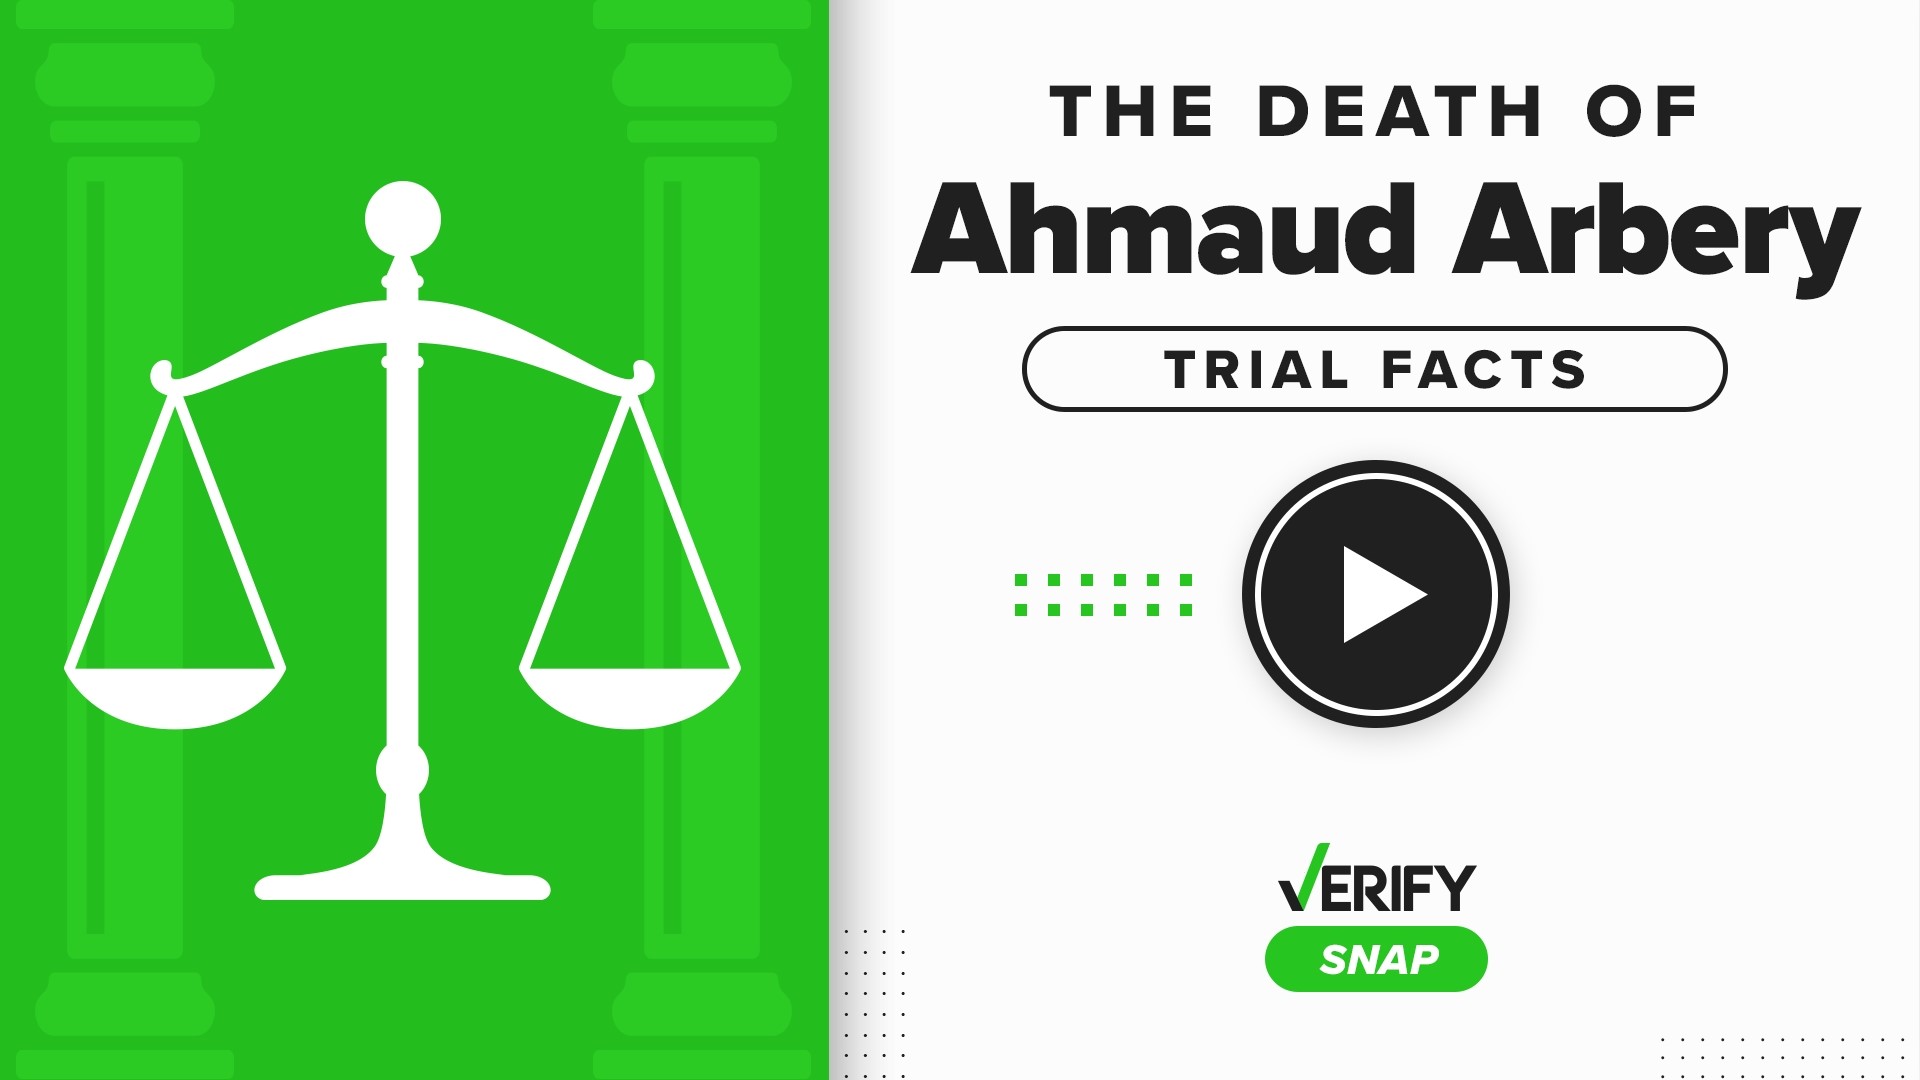 As the trial of the three men accused of killing Ahmaud Arbery begins, the VERIFY team examines how the case has led to the change of laws in Georgia.